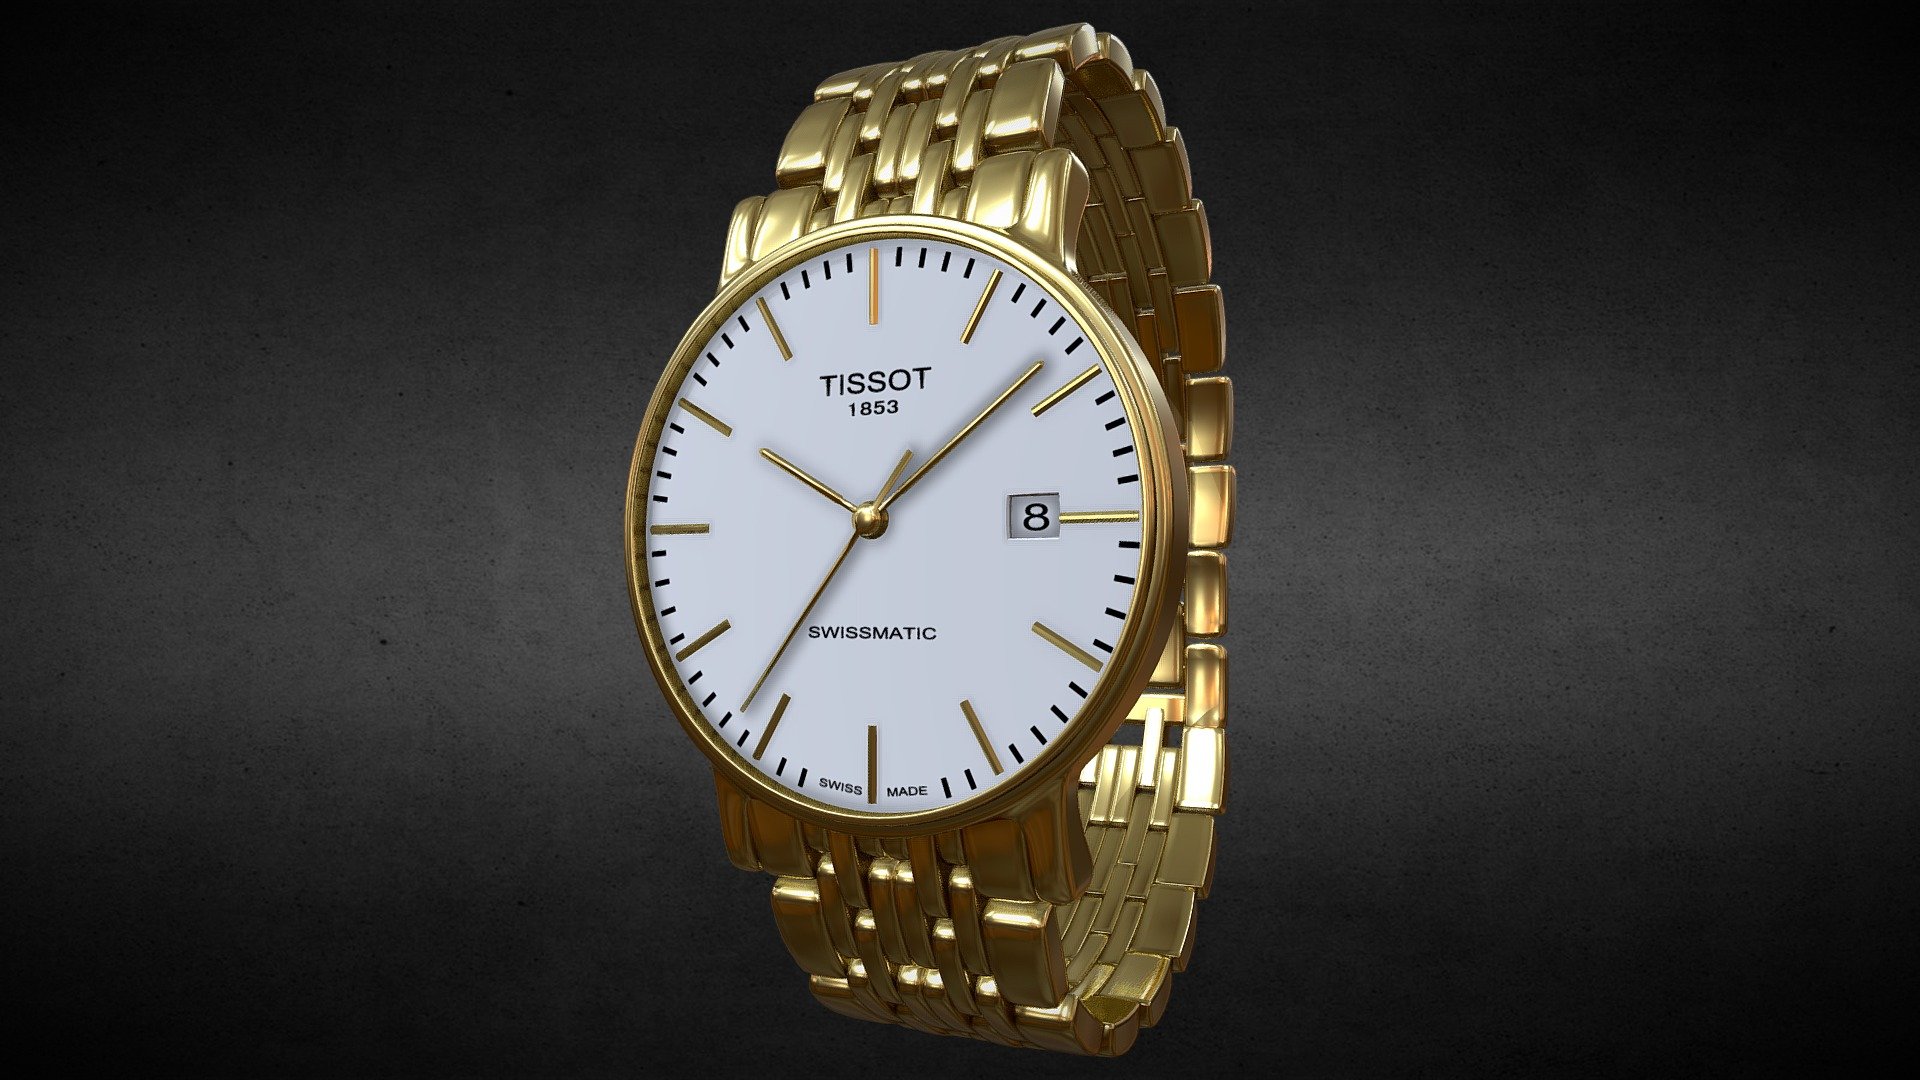 Awesome stainless steel Tissot T-Gold Carson T73.3.413.11 watch․
Use for Unreal Engine 4 and Unity3D. Try in augmented reality in the AR-Watches app. 
Links to the app: Android, iOS

Currently available for download in FBX format.

3D model developed by AR-Watches

Disclaimer: We do not own the design of the watch, we only made the 3D model 3d model